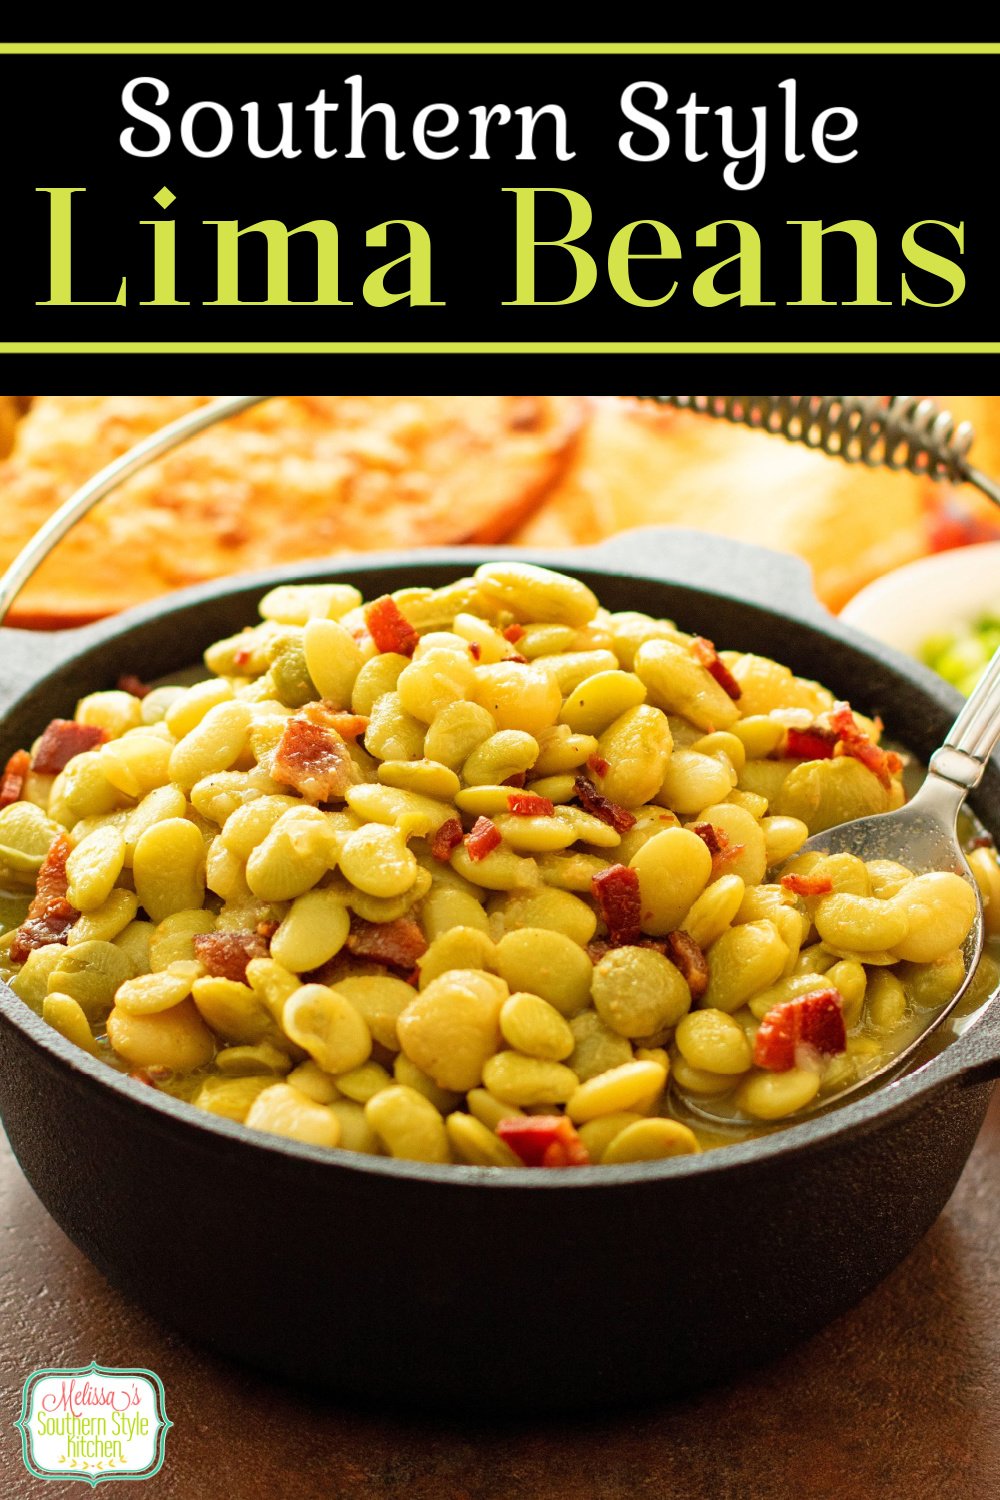 This easy Lima Beans Recipe will take you from weekday family meals to holiday gatherings #limabeans #butterbeans #howtomakelimabeans #thanksgivingsidedishes #beans #beanrecipes #babylimabeansrecipe #frozenlimabeans via @melissasssk